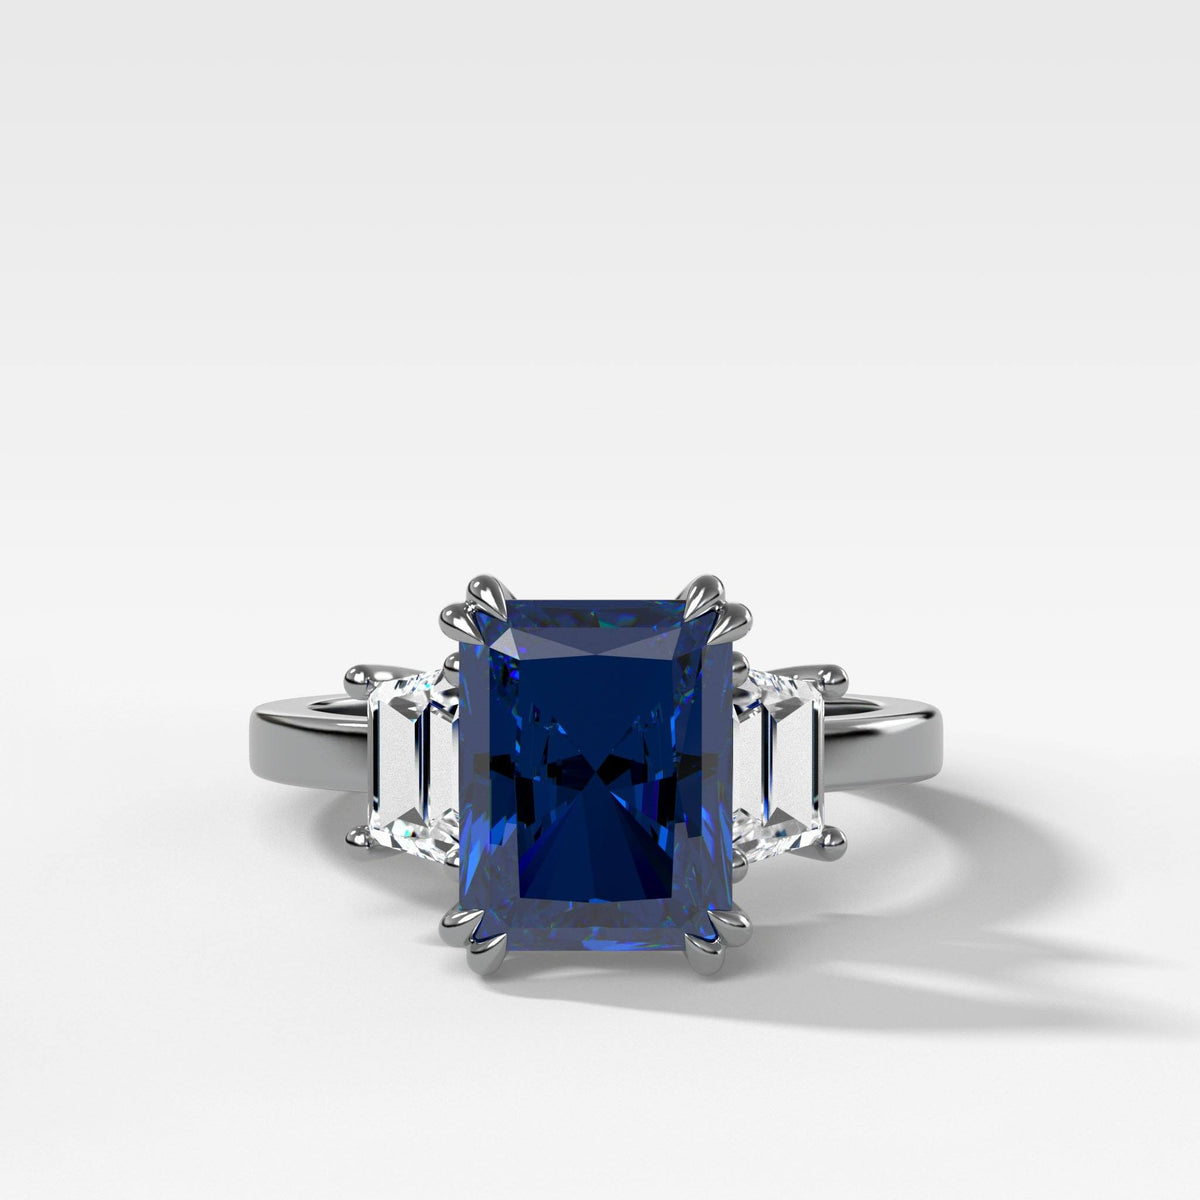 Sapphire Radiant Cut With Trapezoid Side Stone Engagement Ring by Good Stone in White Gold